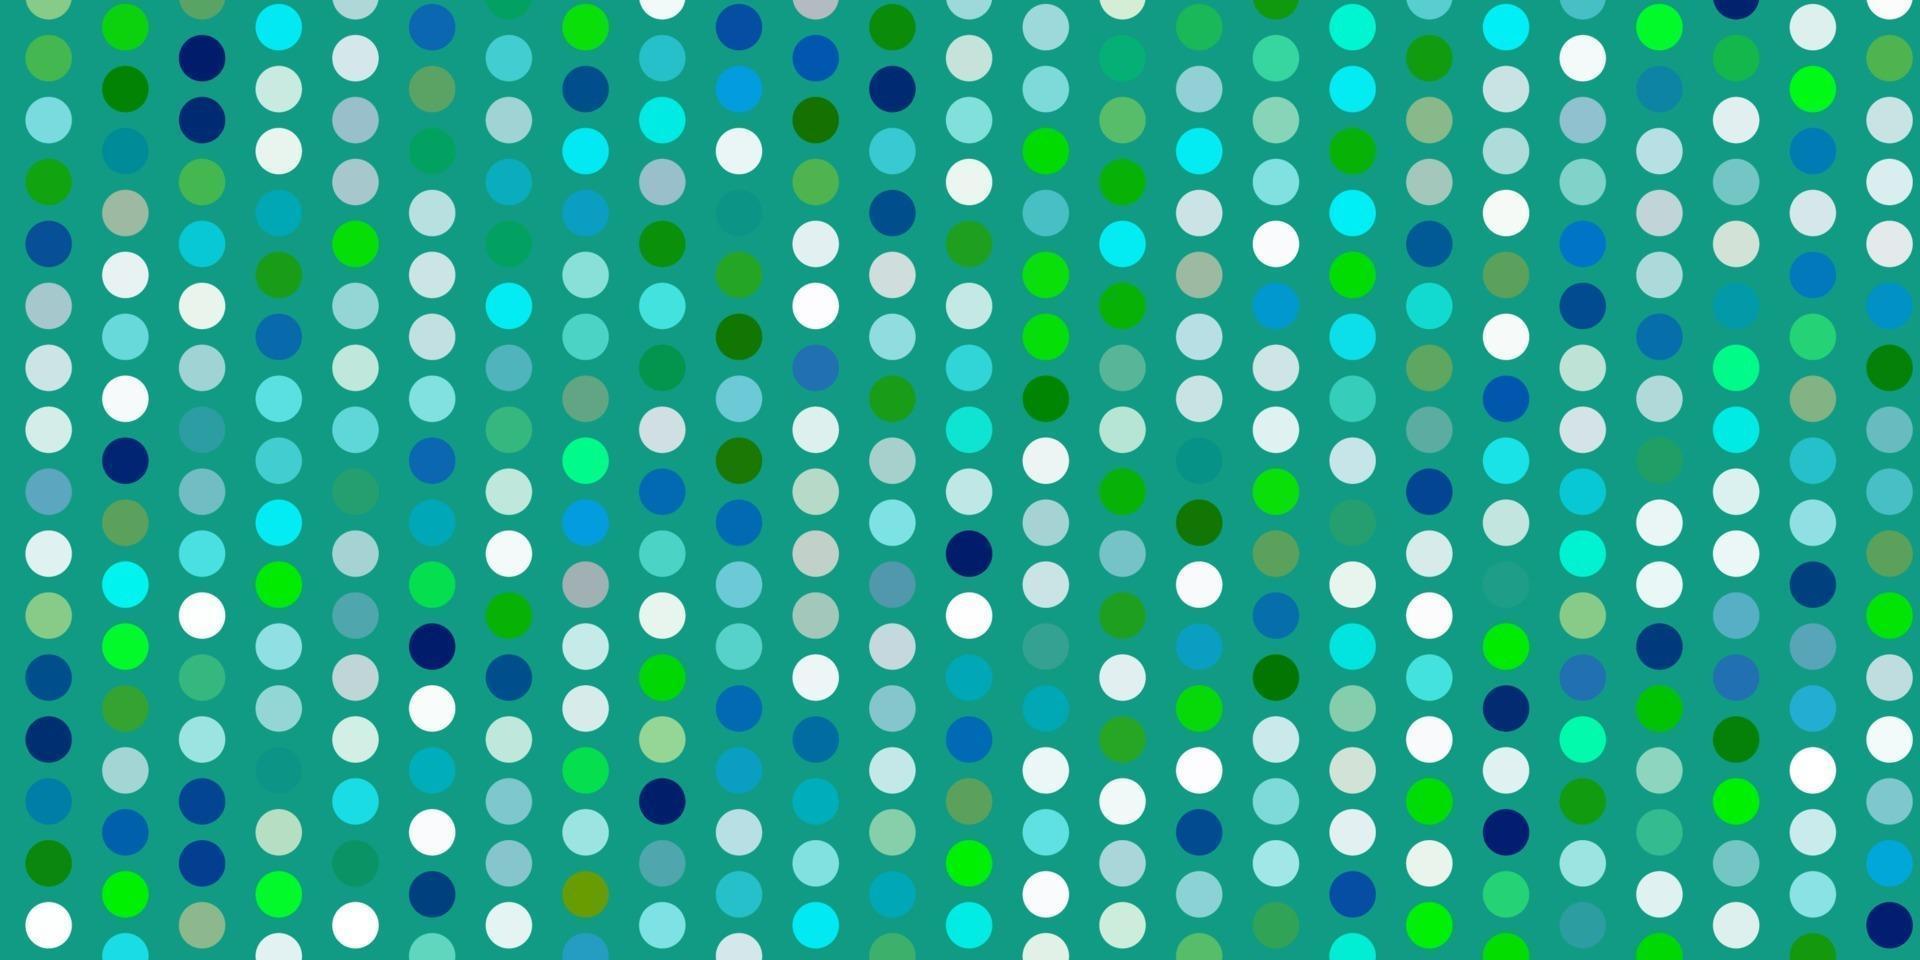 Light blue, yellow vector template with circles.